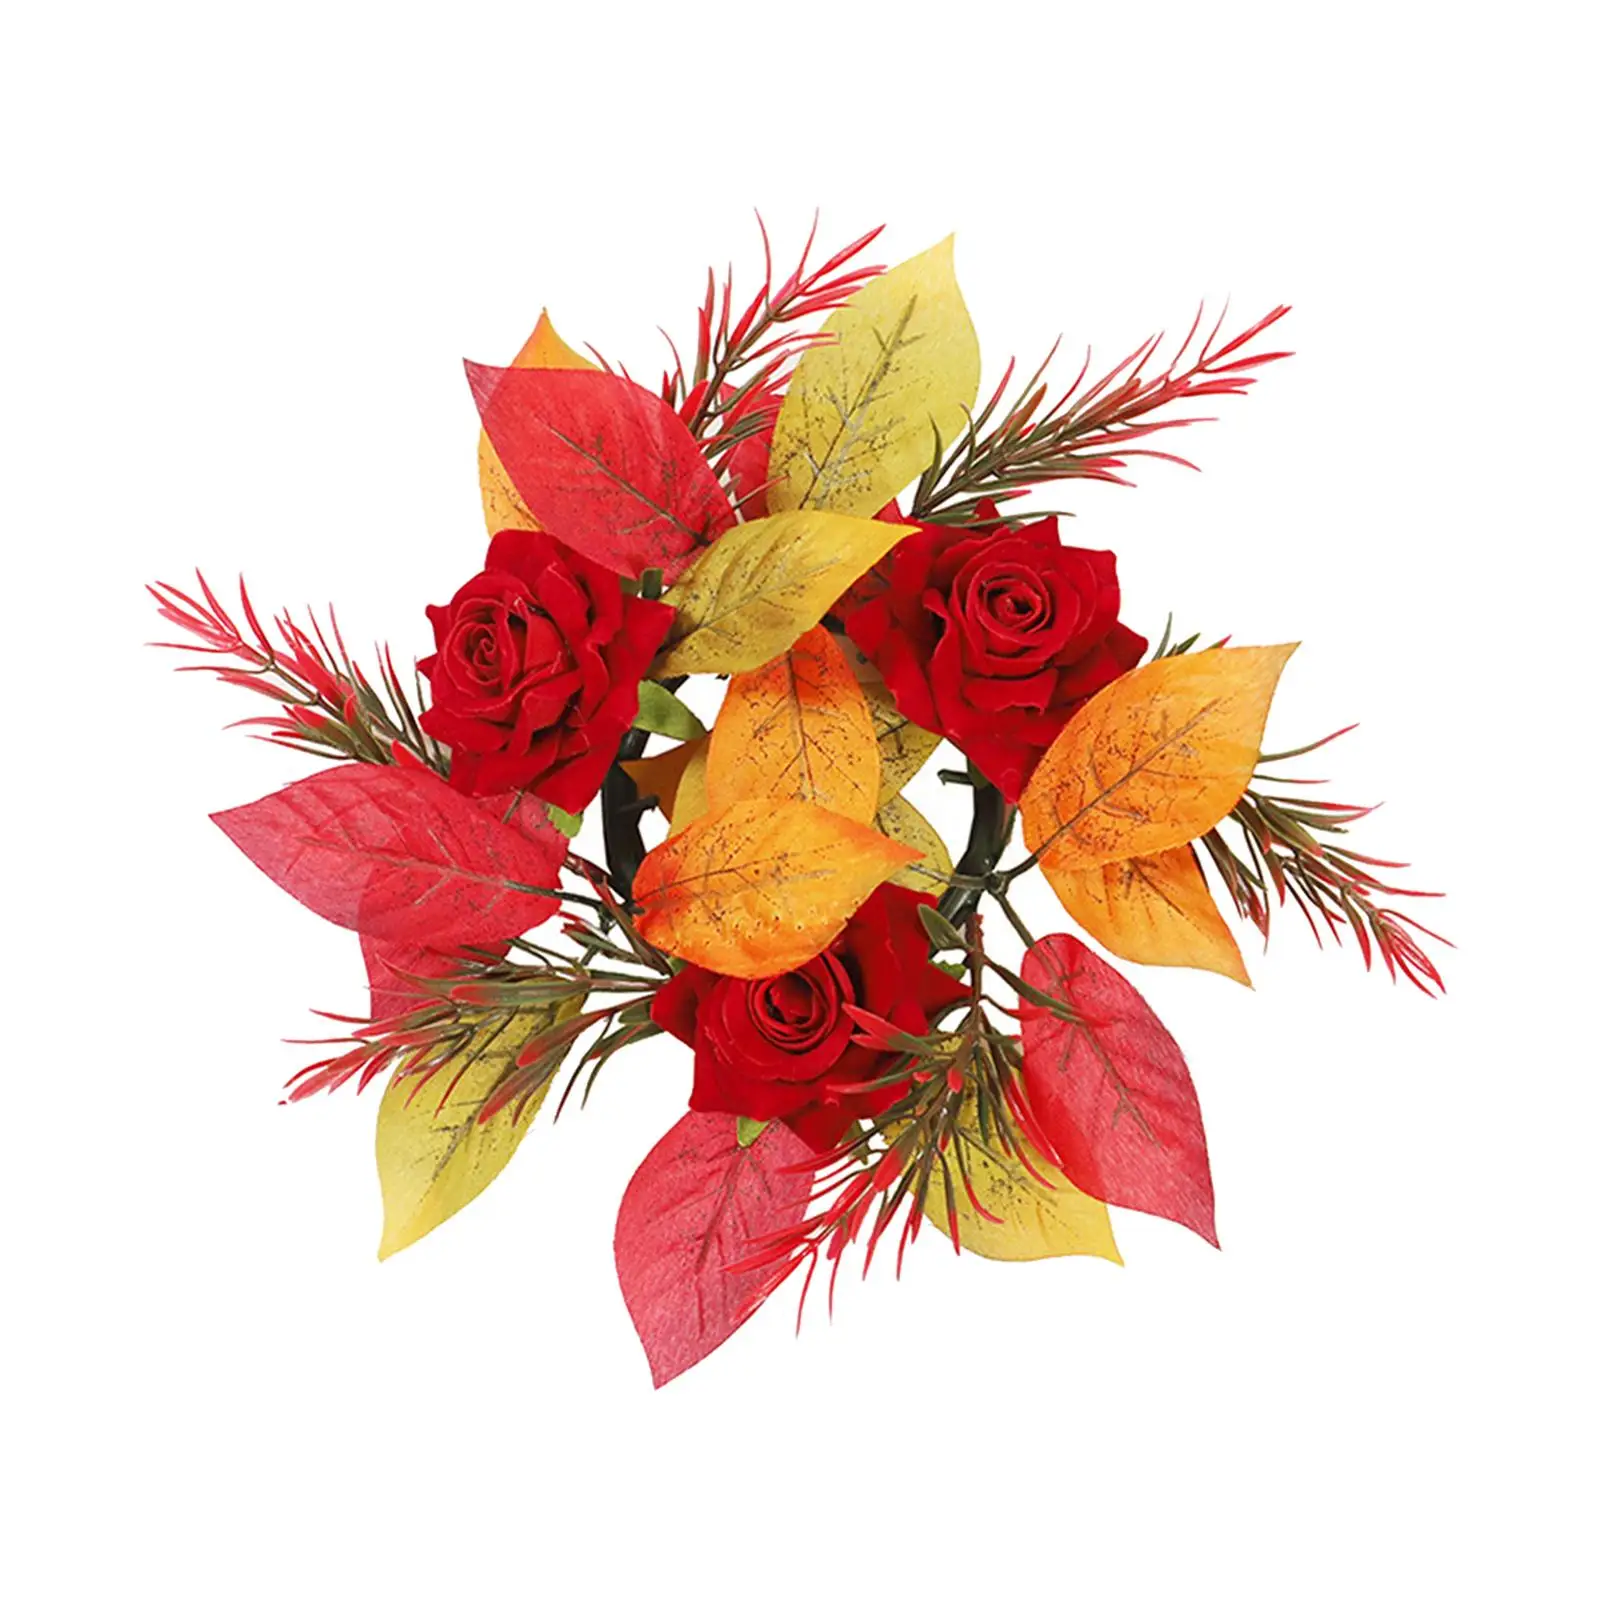 Candle Ring Wreath Fall Wreath Decorative Maple Leaves Wreath Candle Holder Rose Wreath for Centerpieces Festival Living Room